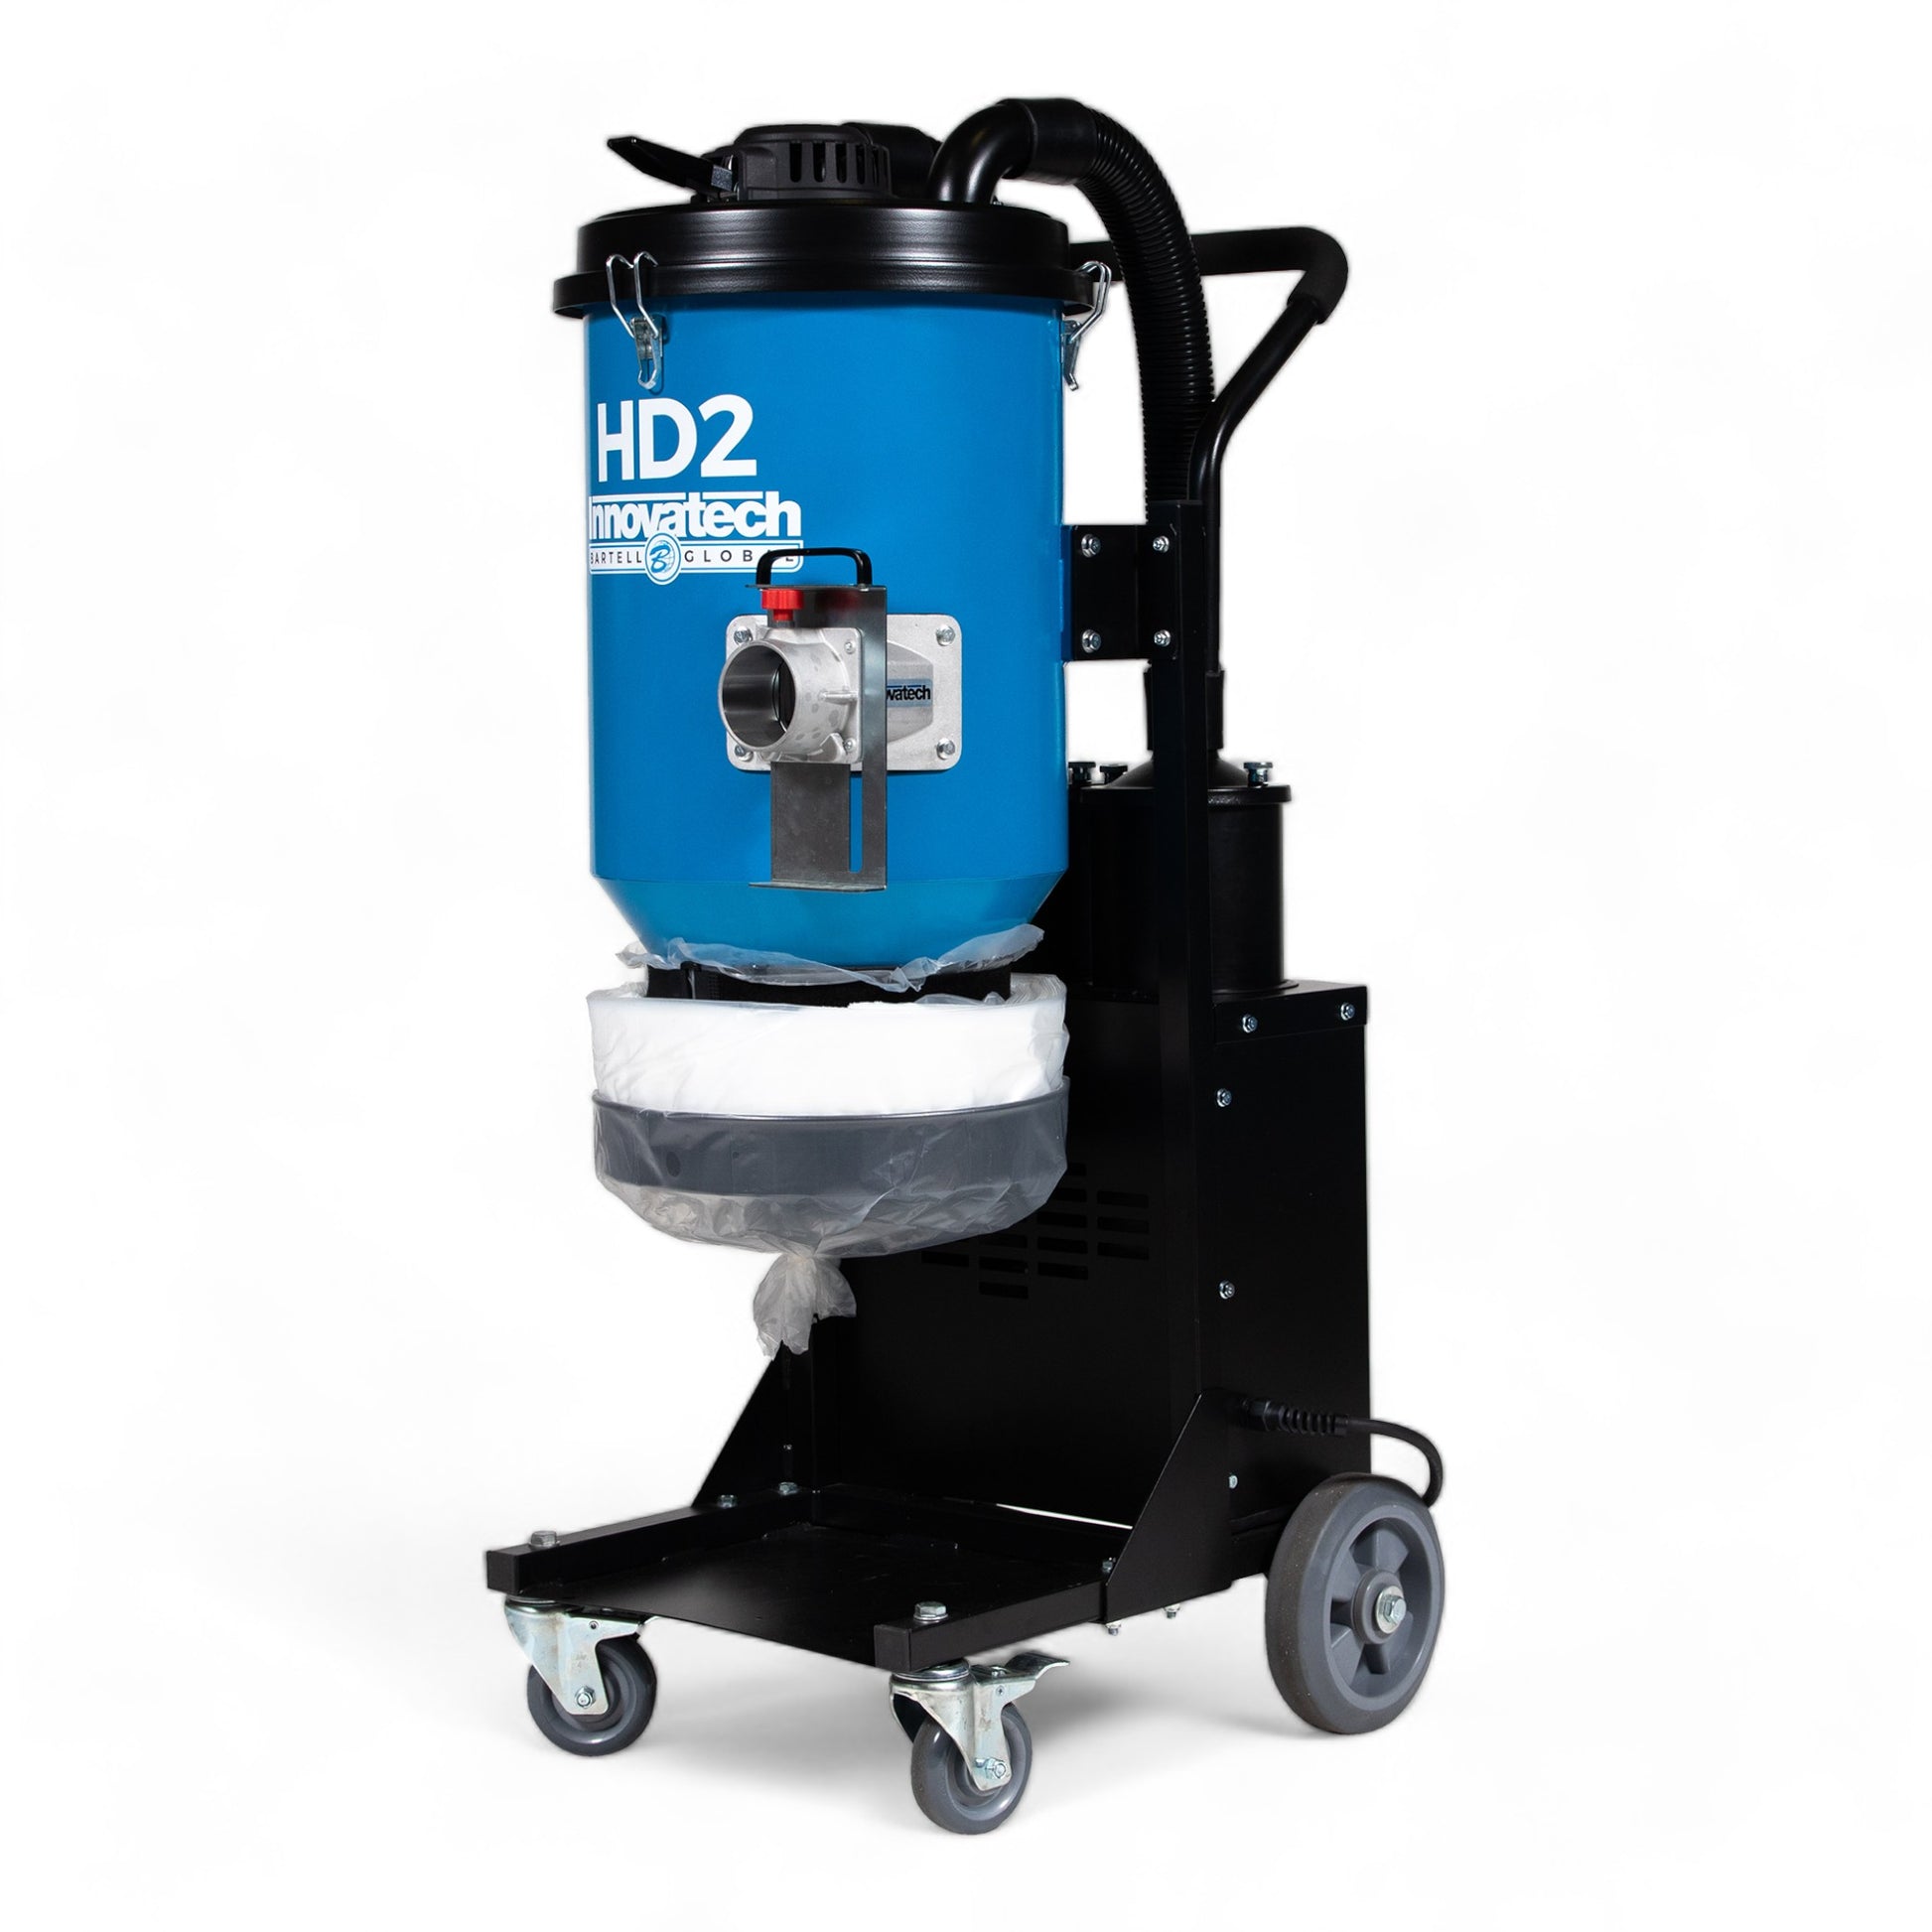 HD2 Bartell Dust Collector